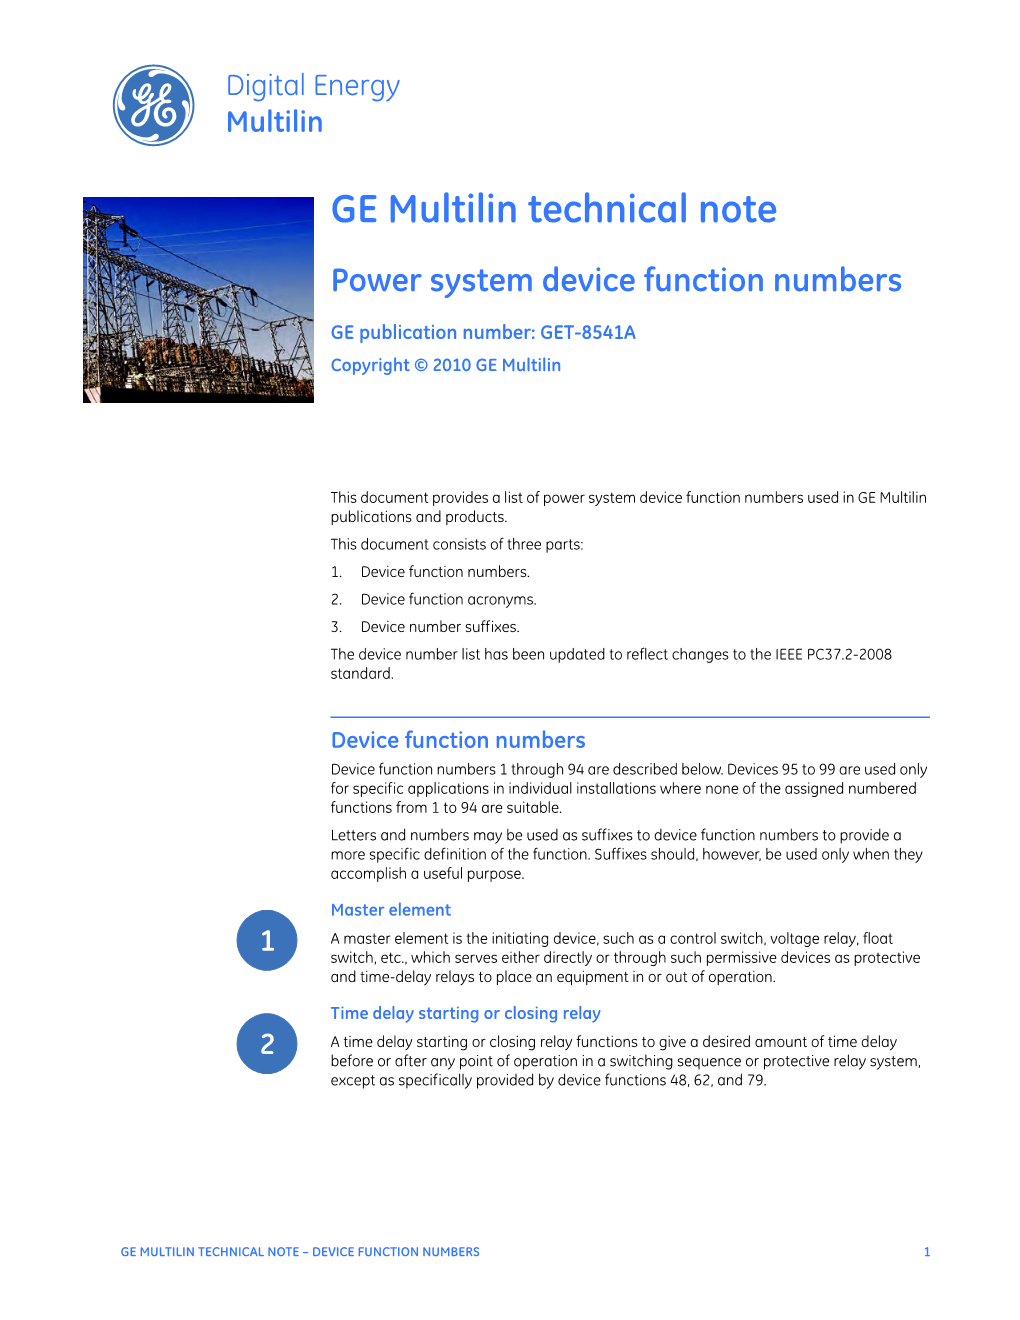 GE Multilin Technical Note